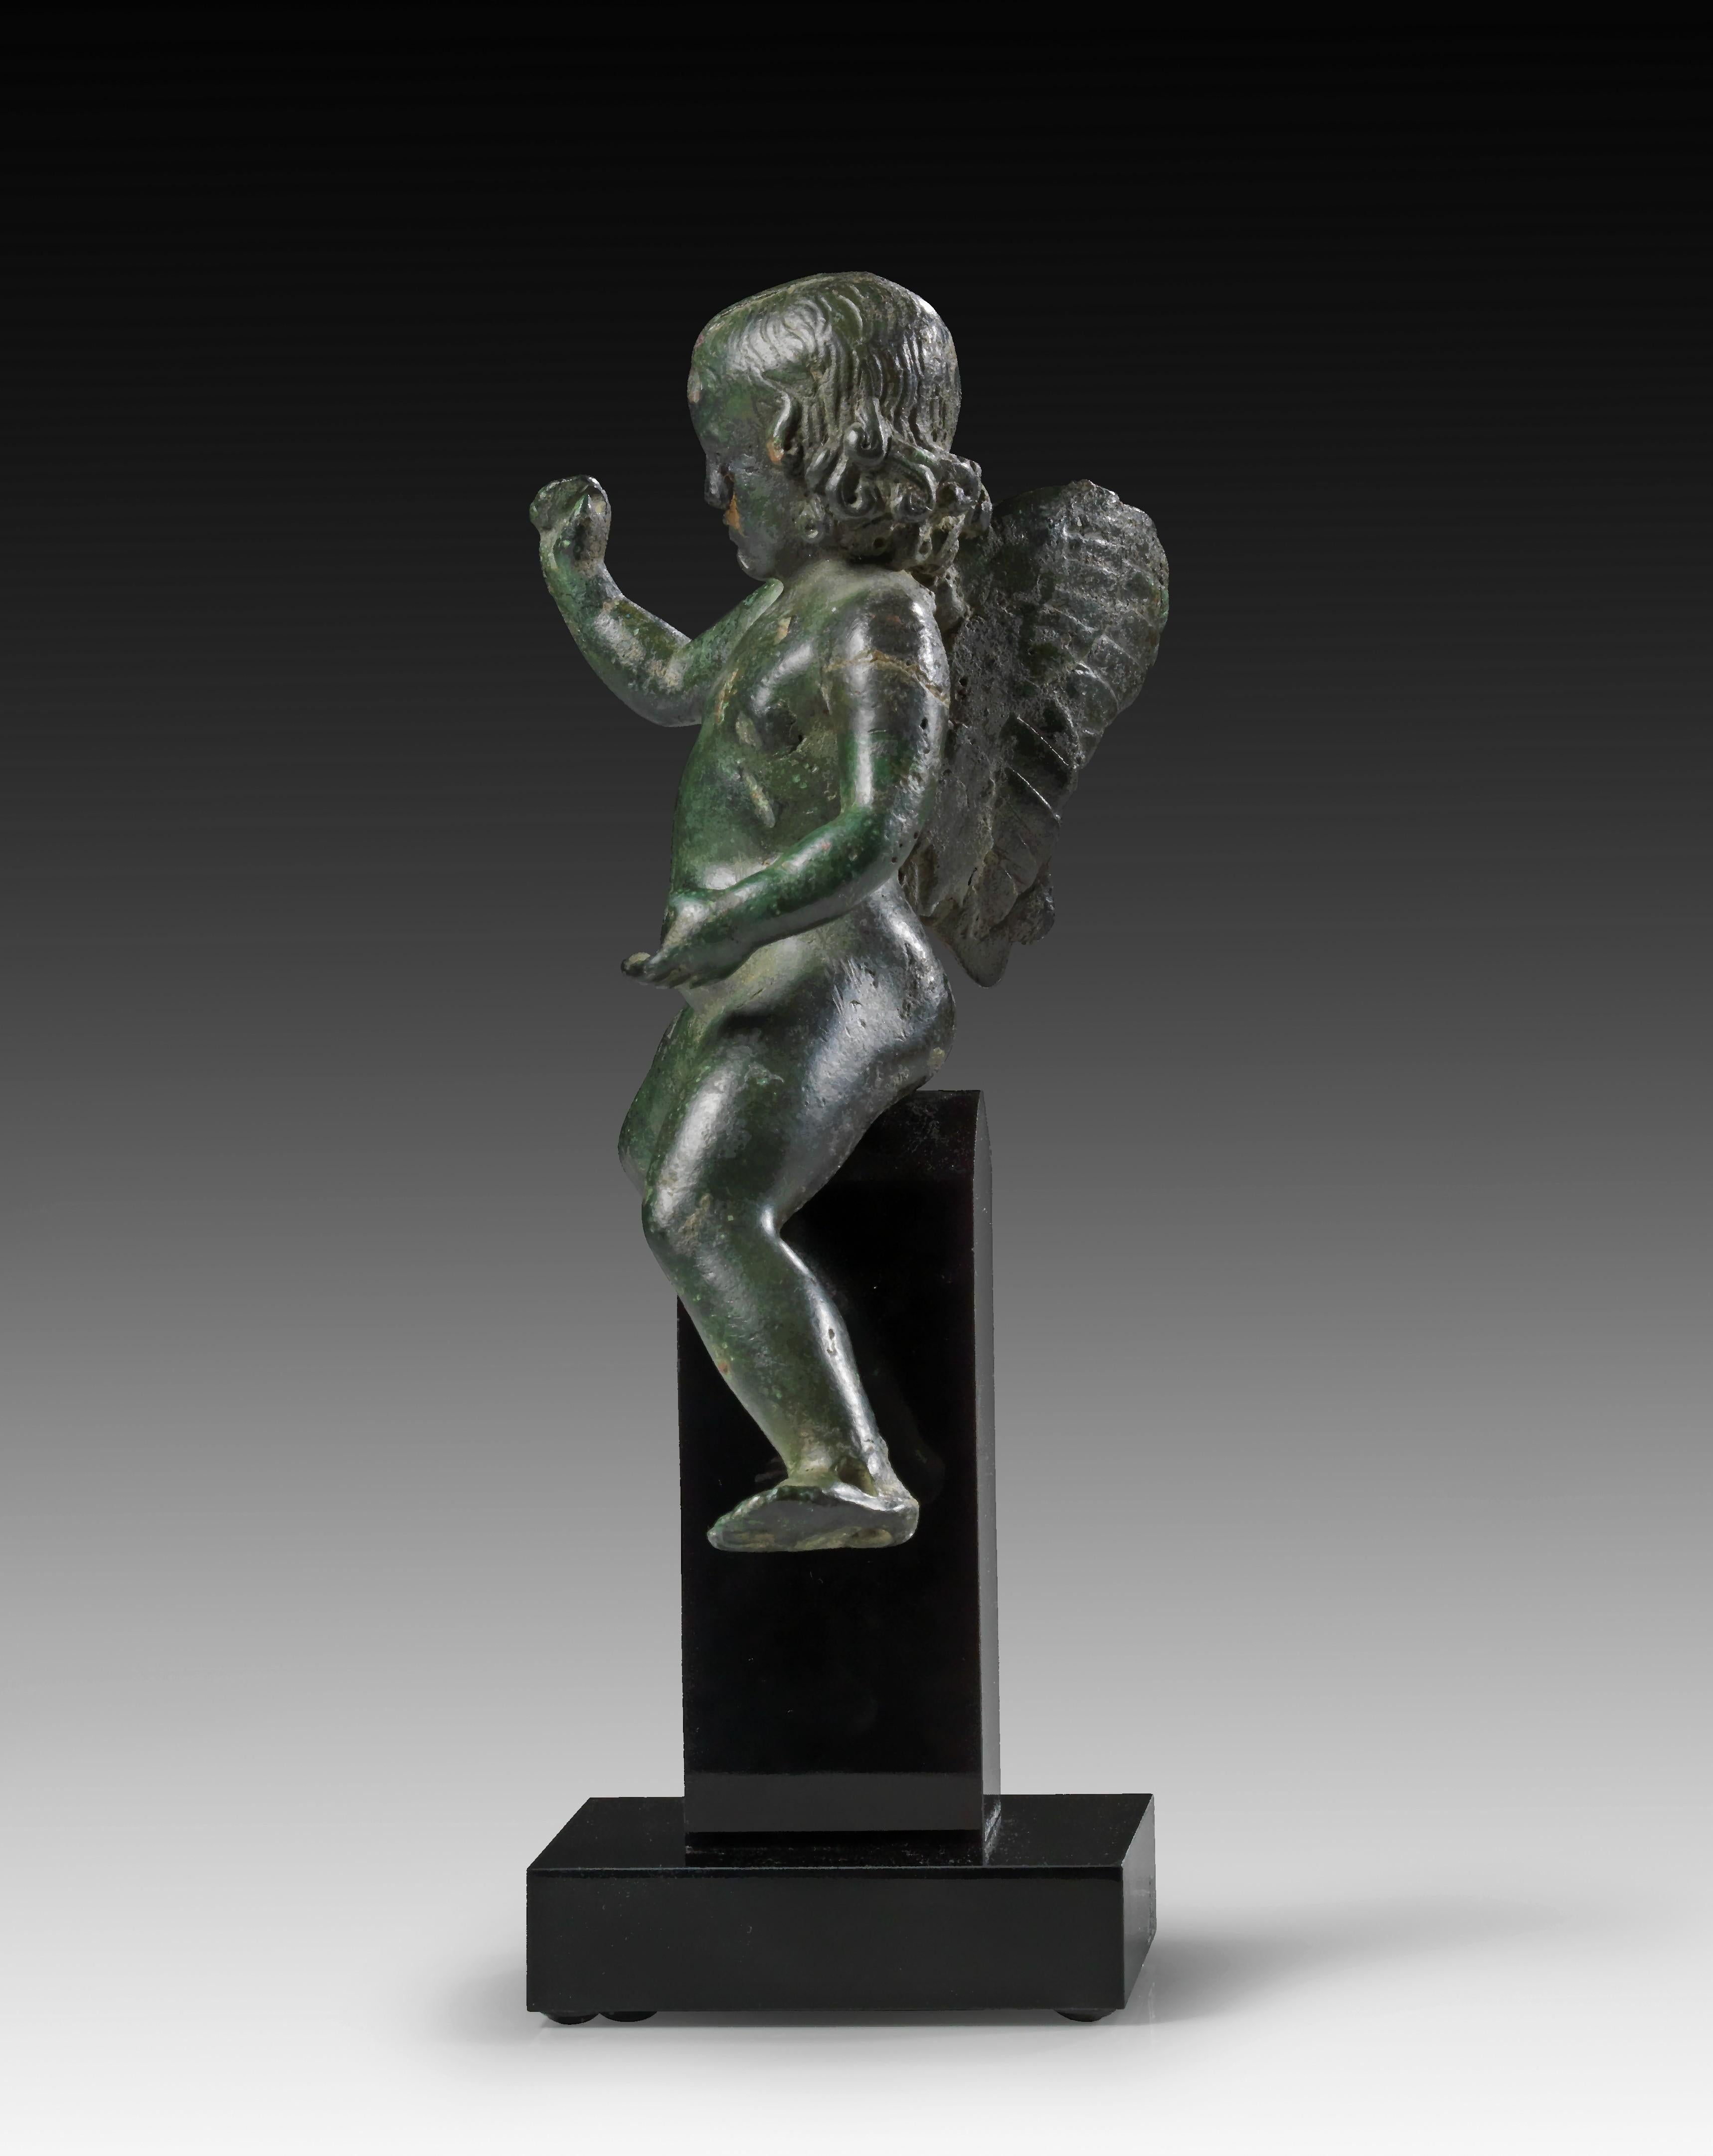 ANCIENT ROMAN BRONZE FIGURE OF WINGED EROS RIDING A DOLPHIN, 2ND CENTURY AD - Sculpture by Unknown